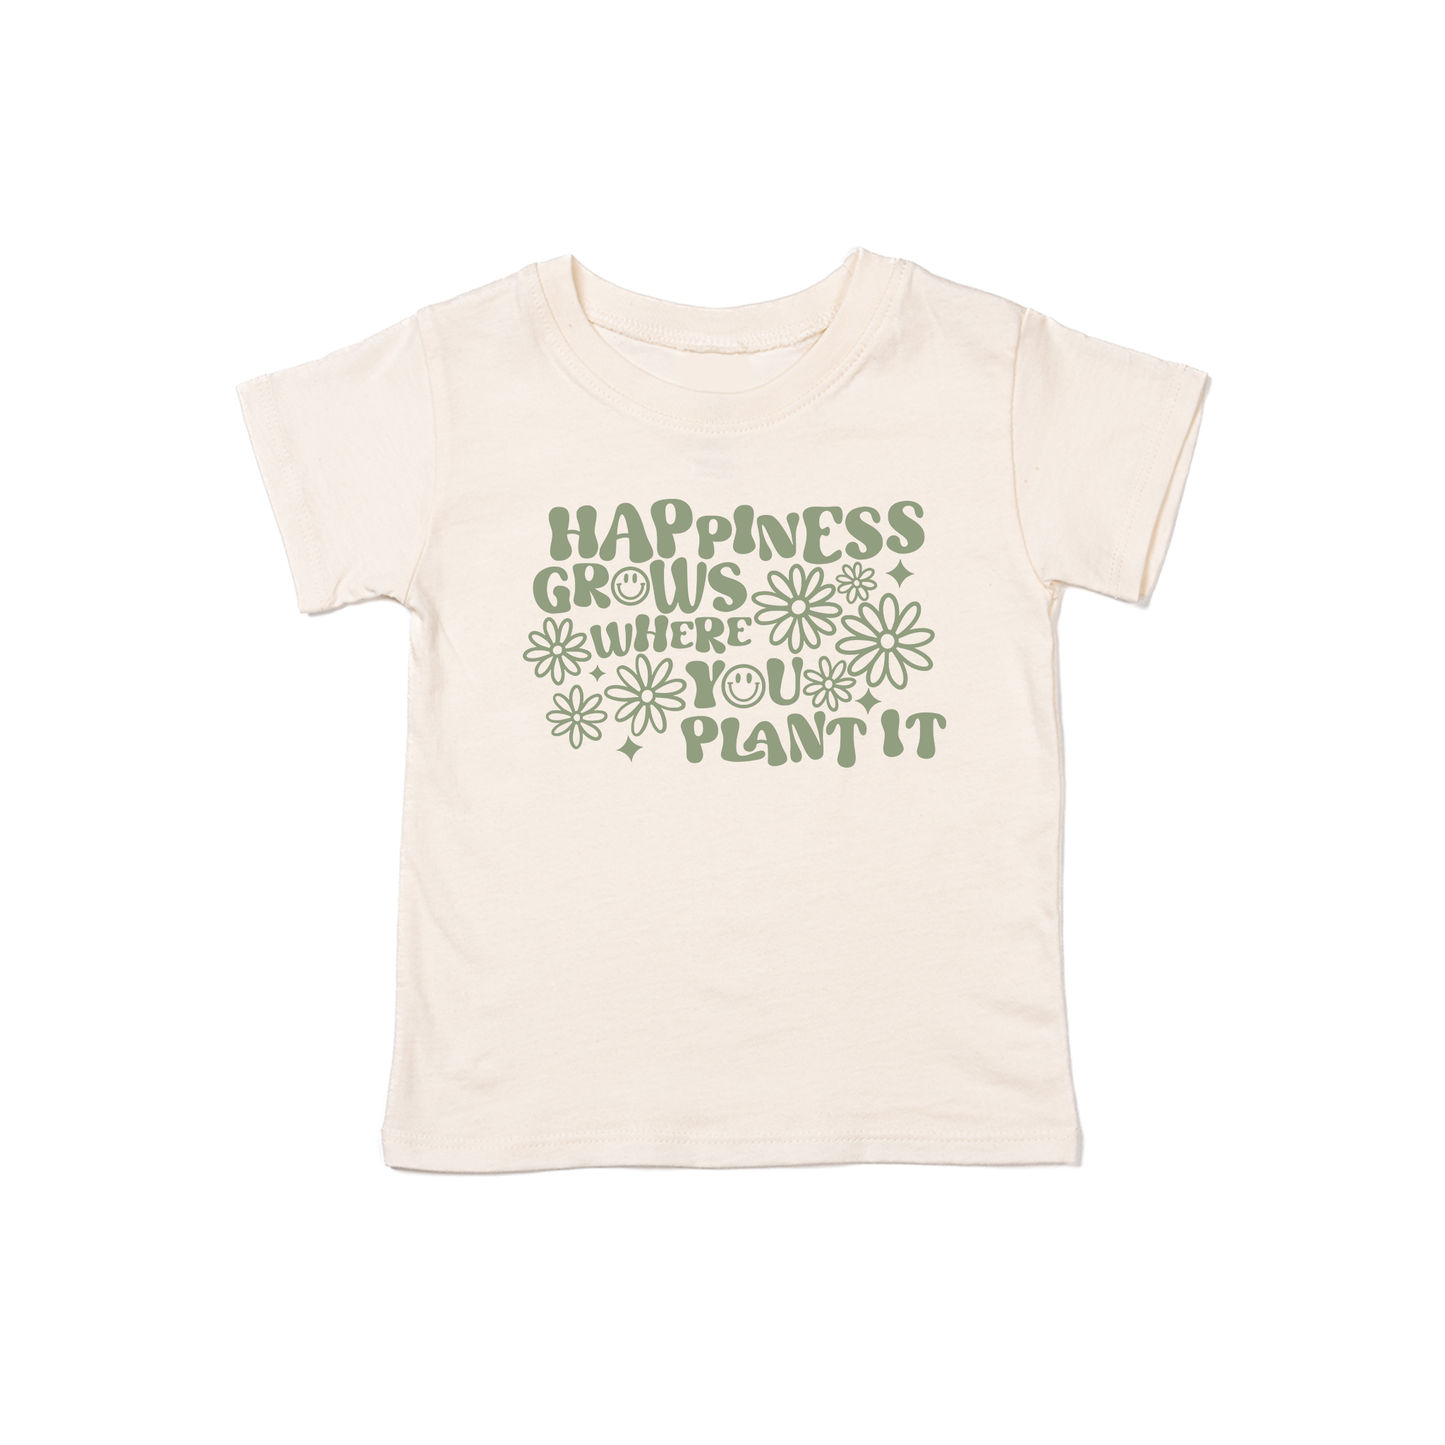 Happiness Grows Where You Plant It - Kids Tee (Natural)